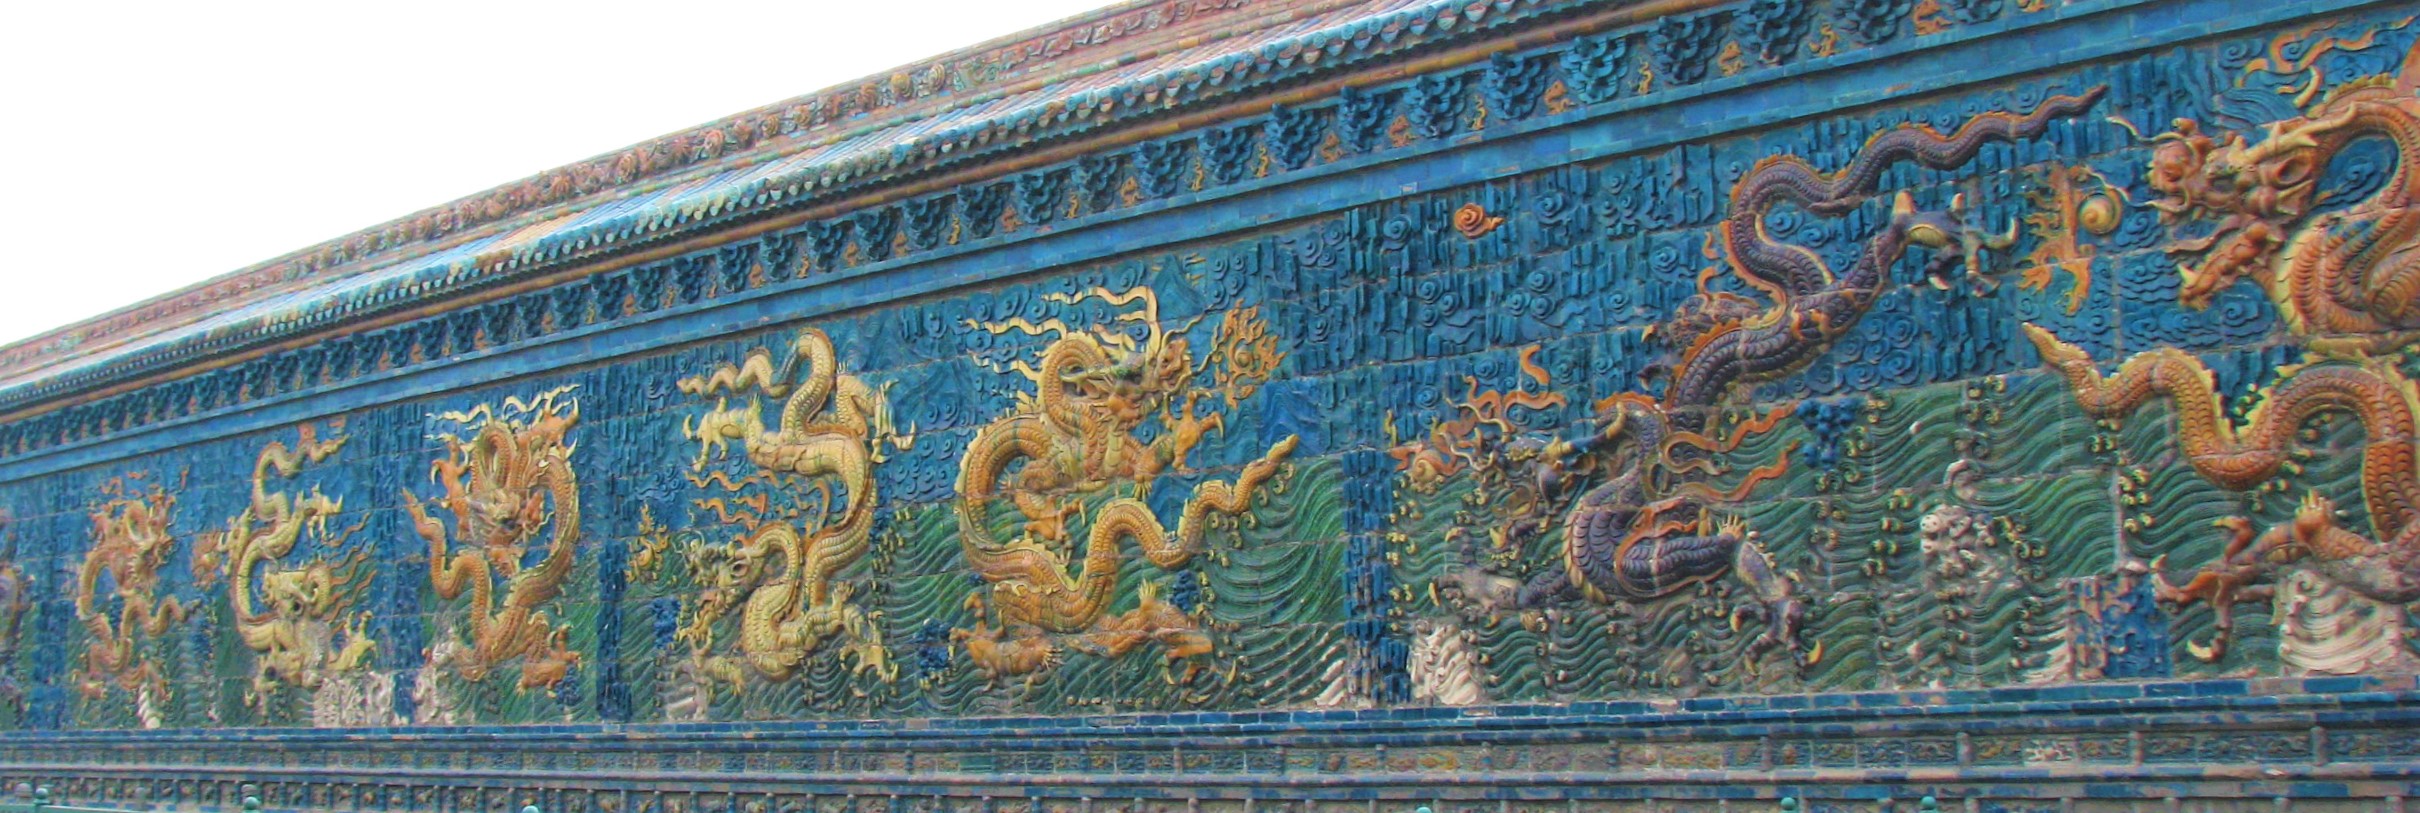 Carry It Like Harry - Why you should see the Nine Dragons Wall 大同九龙壁 in Datong, China?